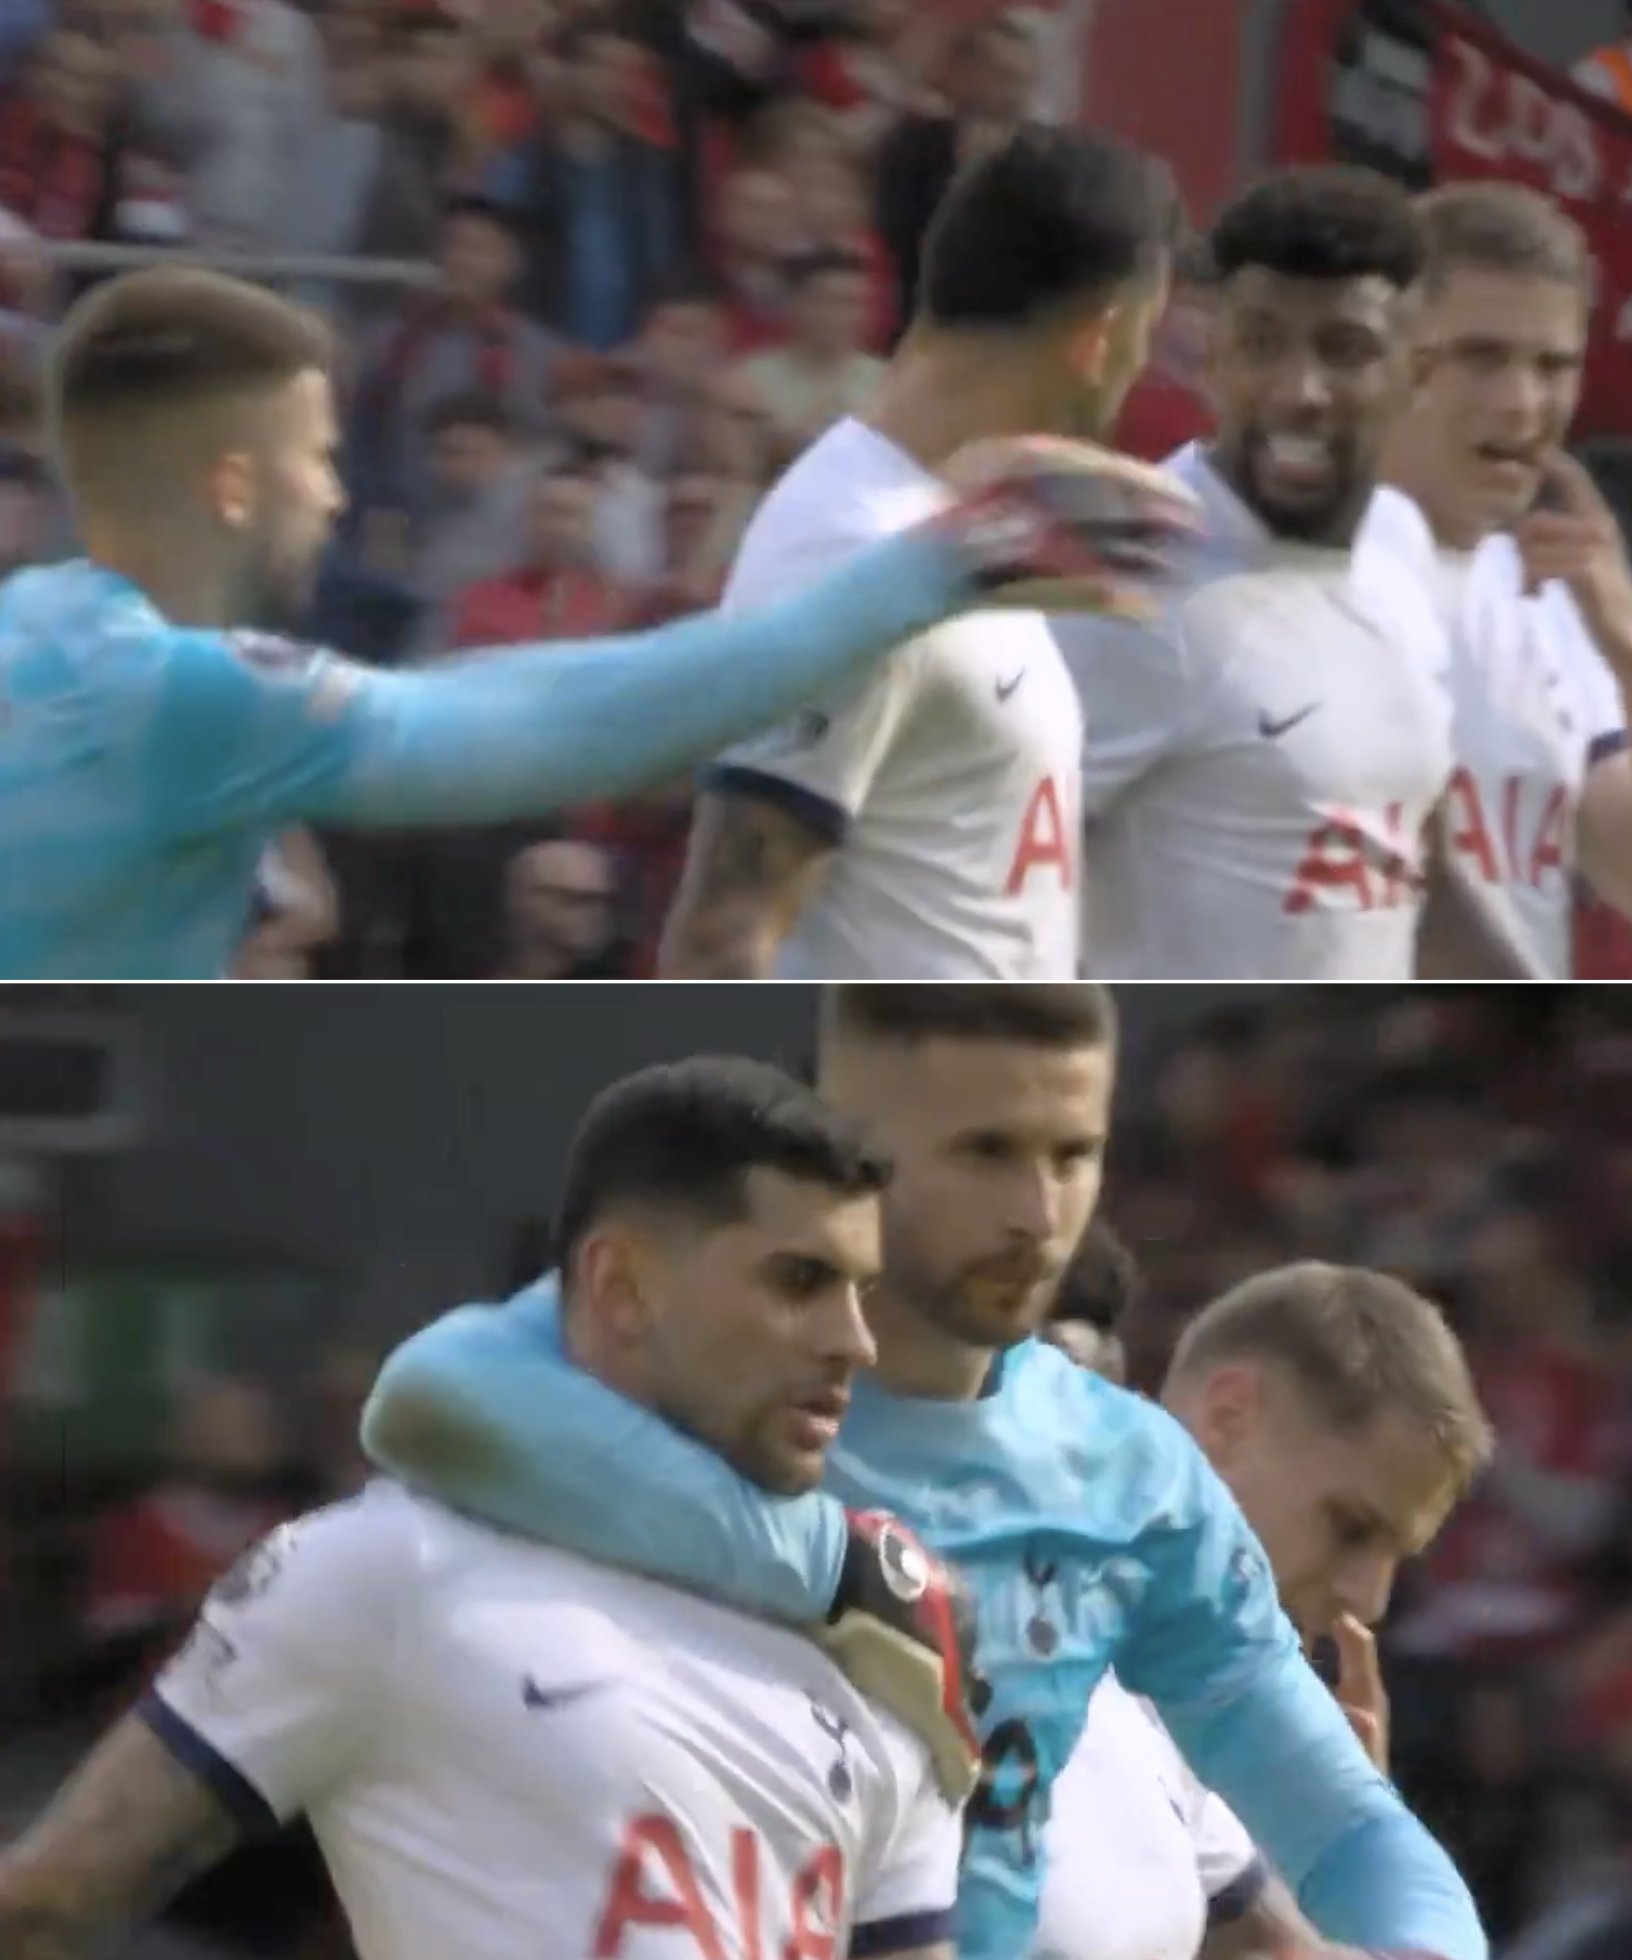 CentreGoals. on X: "🚨🚨| At halftime, Tottenham goalkeeper Vicario  intervened to separate Cristian Romero from Emerson Royal, as they  exchanged words. Vicario physically grabbed Romero by the neck and  separated him from